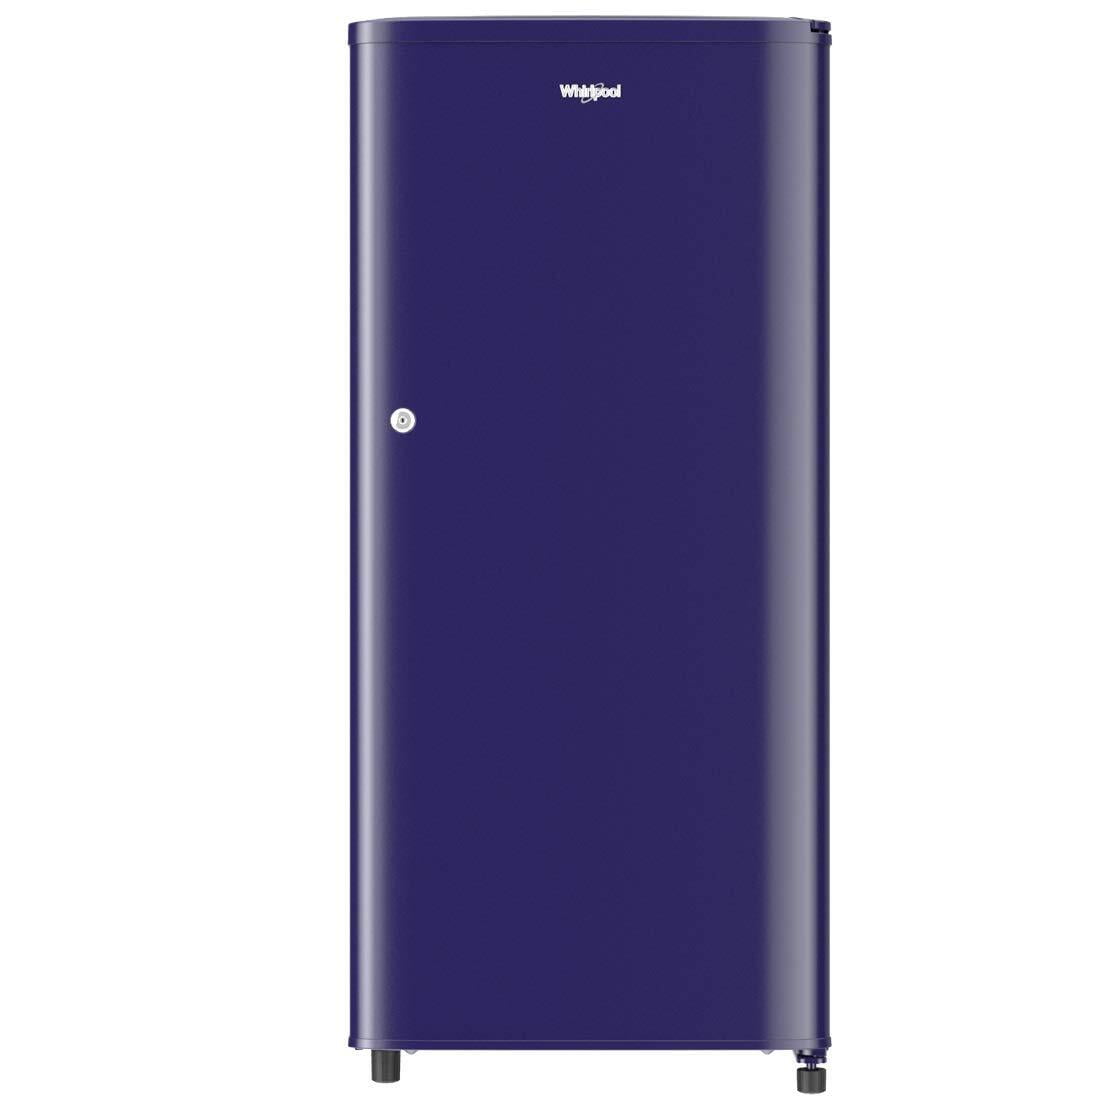 Whirlpool Ref 205 Genius Cls Plus 2s Blue On Dillimall.Com